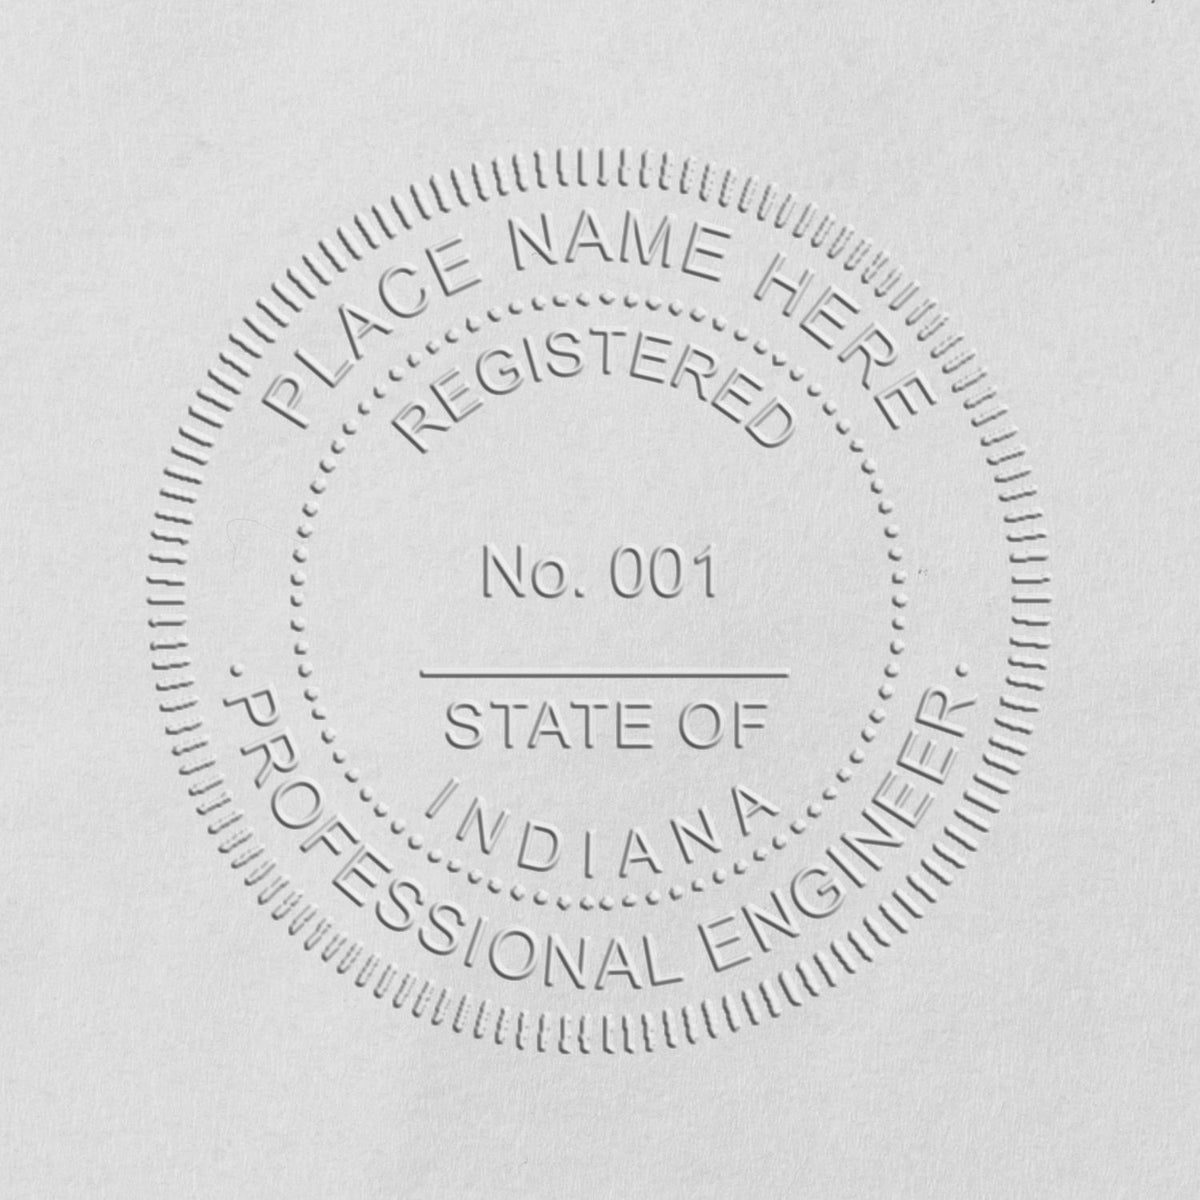 A stamped impression of the Soft Indiana Professional Engineer Seal in this stylish lifestyle photo, setting the tone for a unique and personalized product.